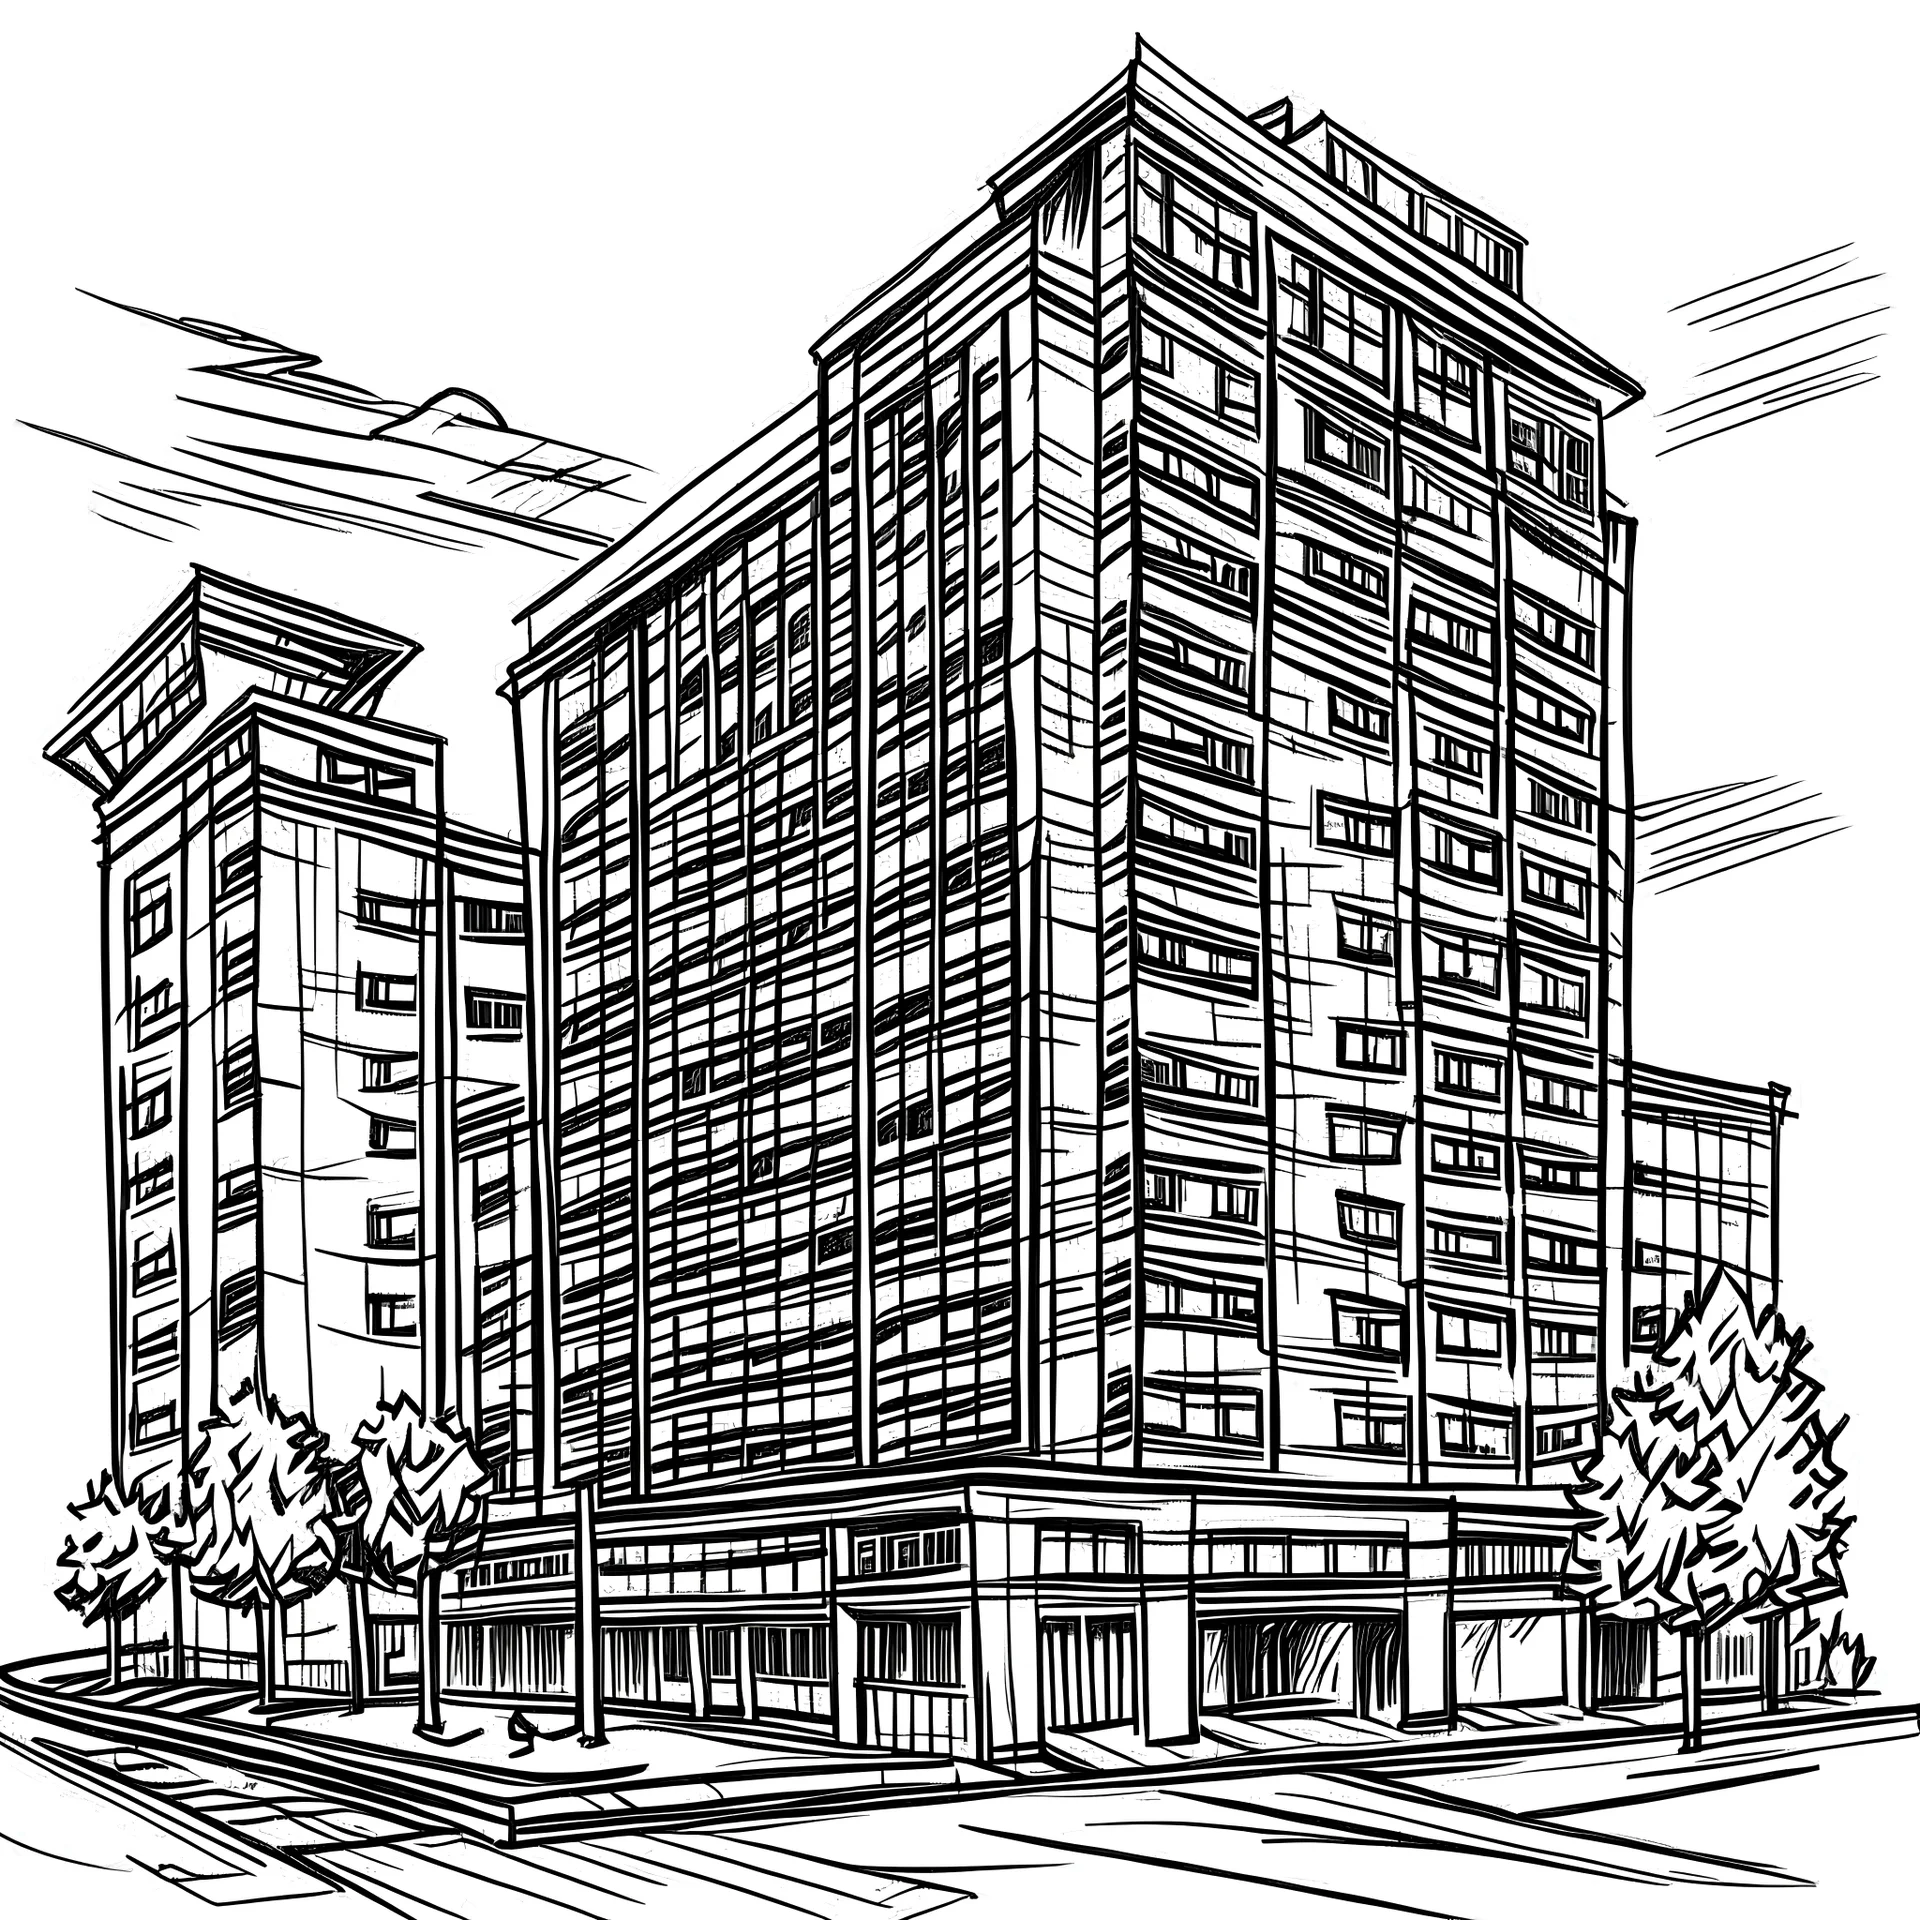 City building, line art, hand drawing style, only outline.